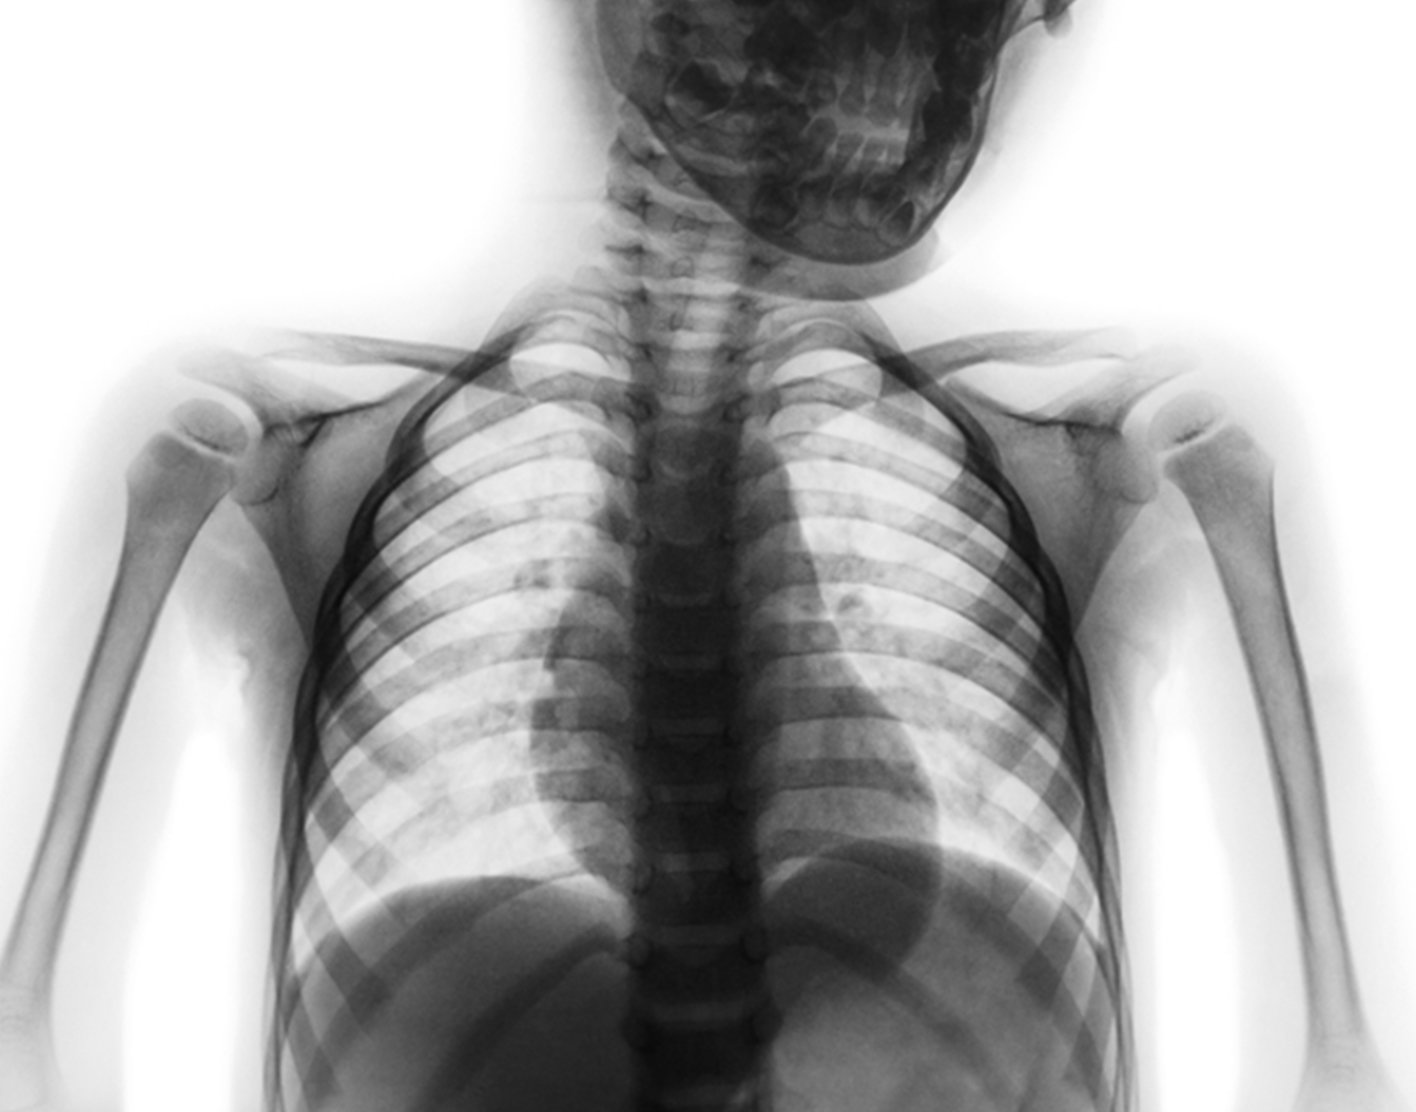 Does insurance cover x rays information